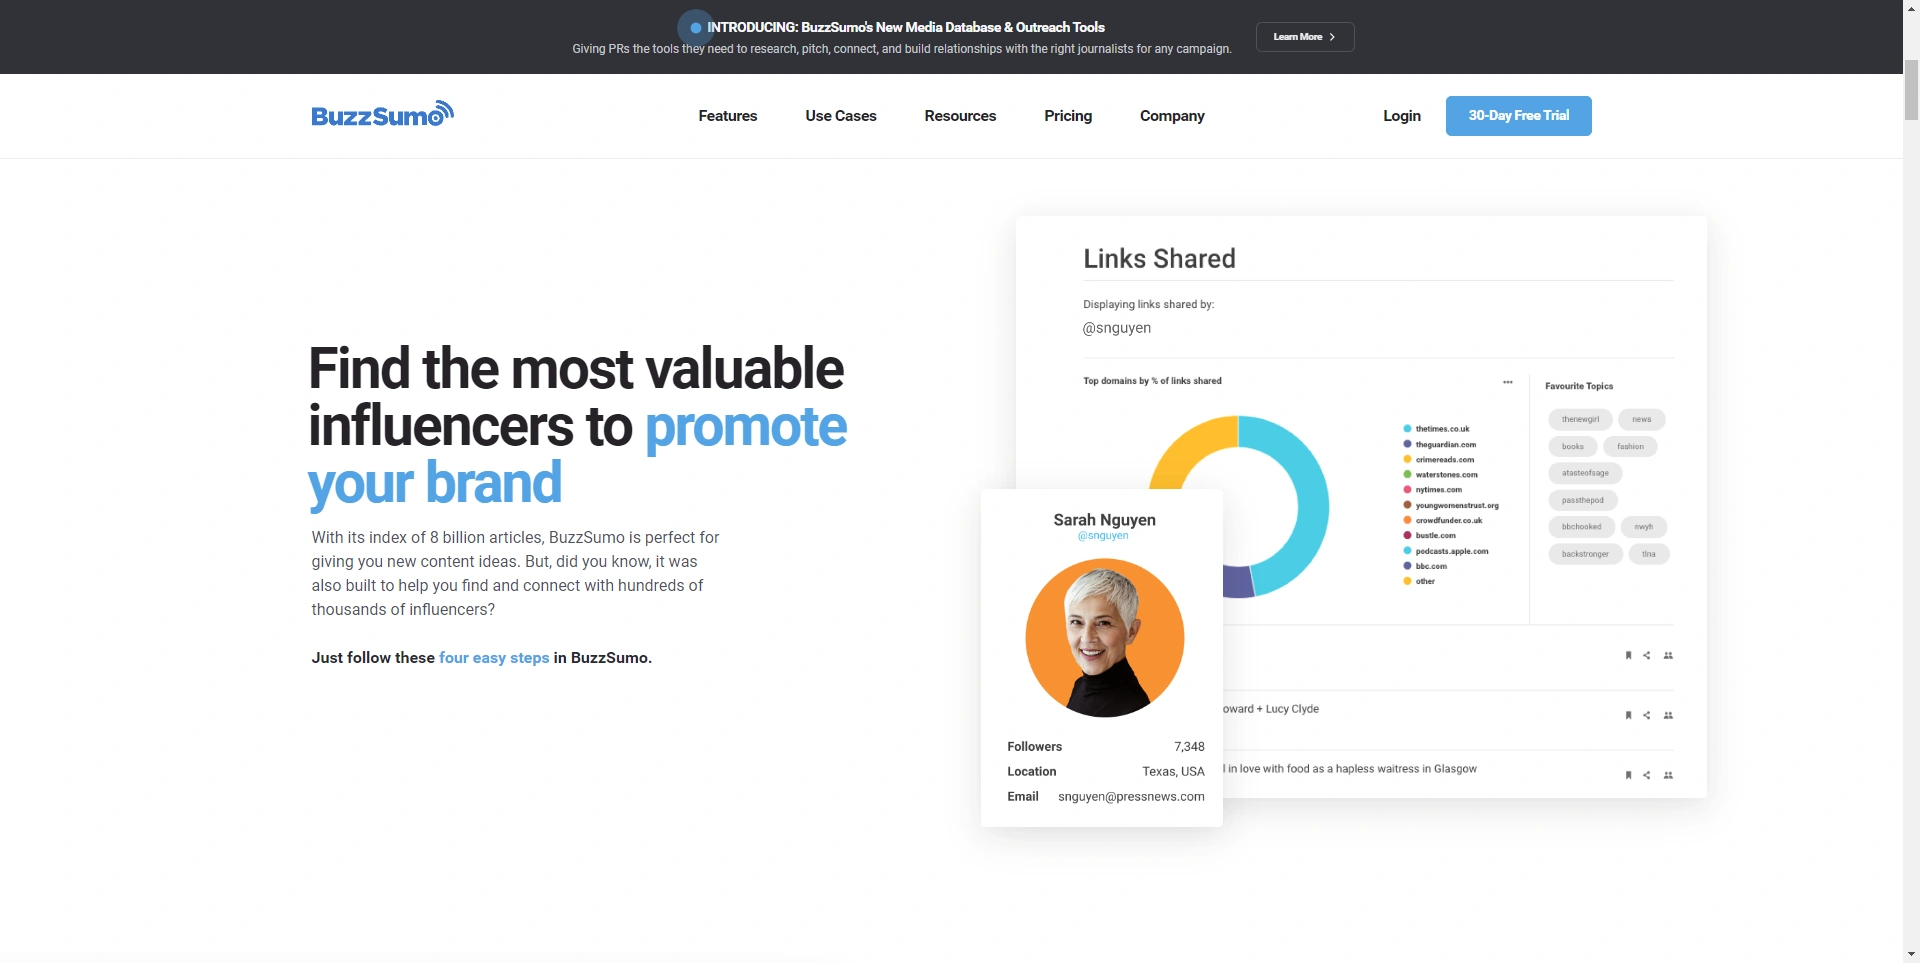 BuzzSumo's Influencer Feature with a visual and a description talking about how you can find influencers to promote your brand